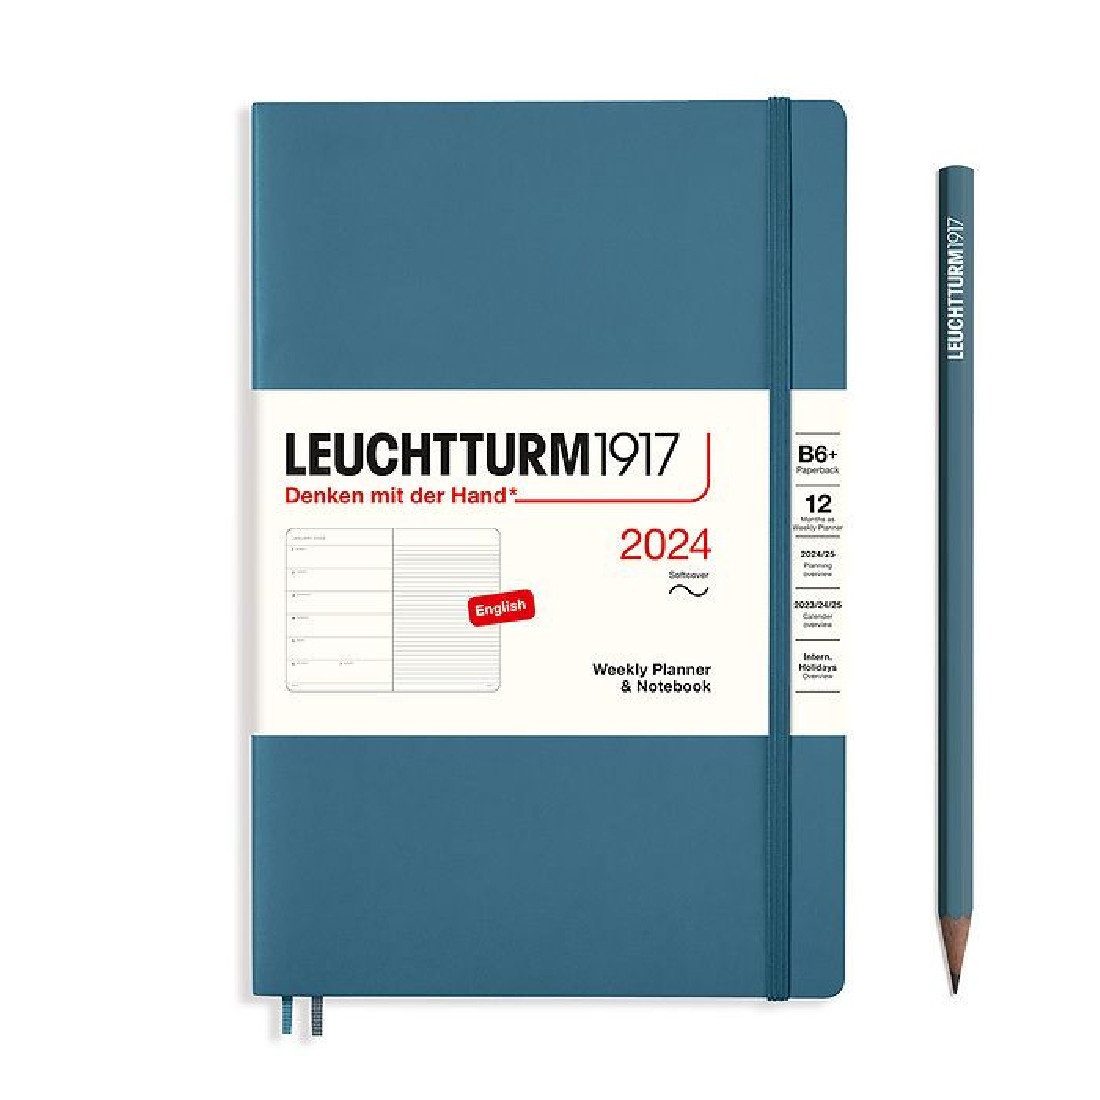 Leuchtturm 1917 Weekly Planner and Notebook 2024 Stone Blue Paperback